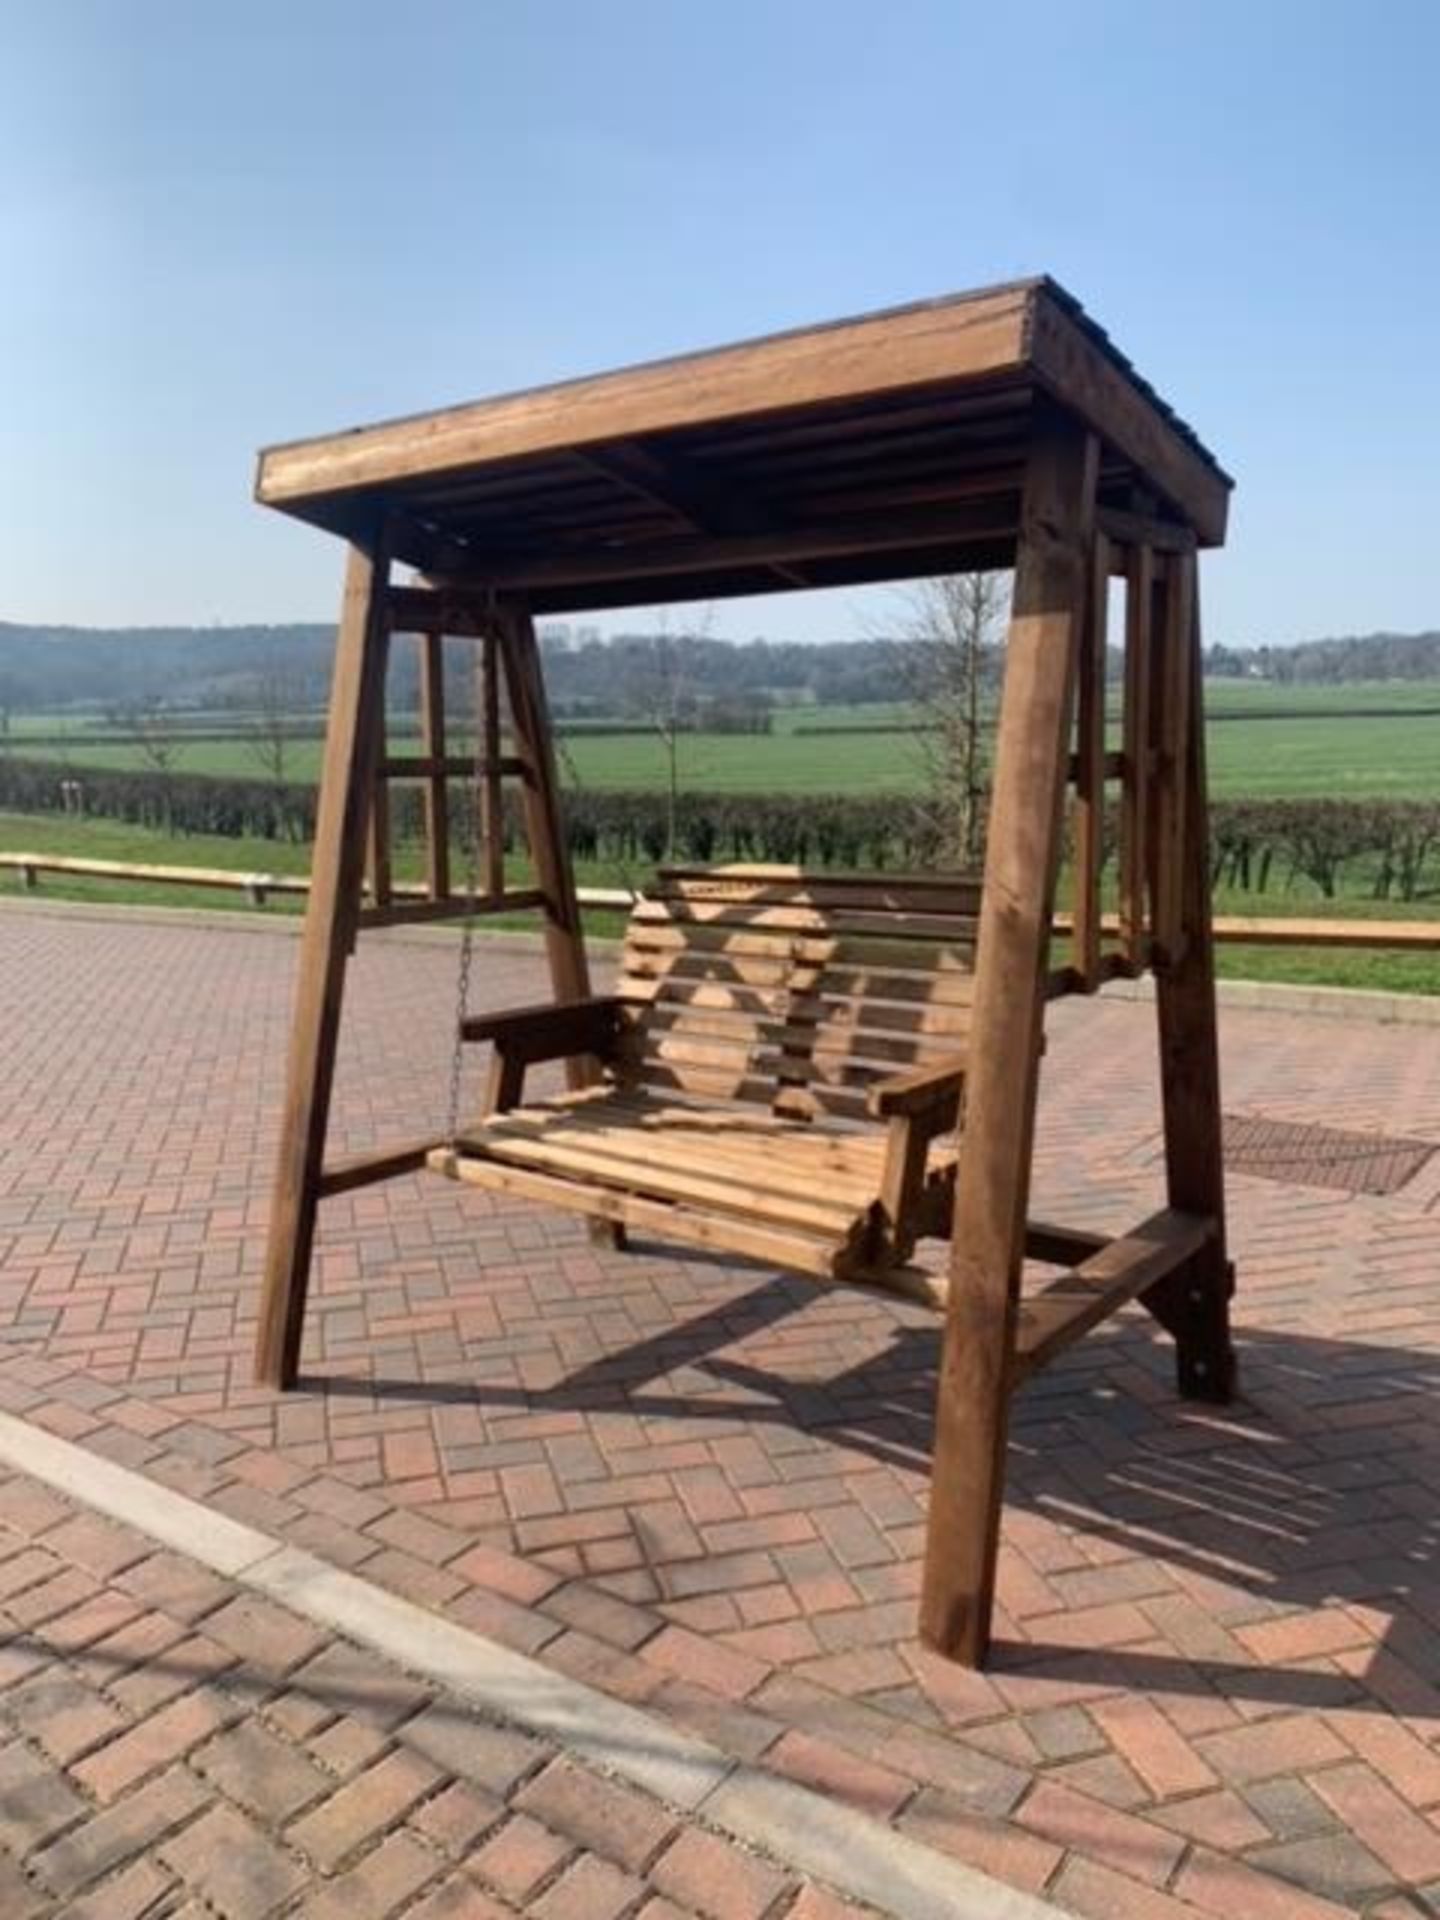 RW - BRAND NEW QUALITY Swing bench Handcrafted Garden Furniture. 2 Seater Swing bench *NO VAT*